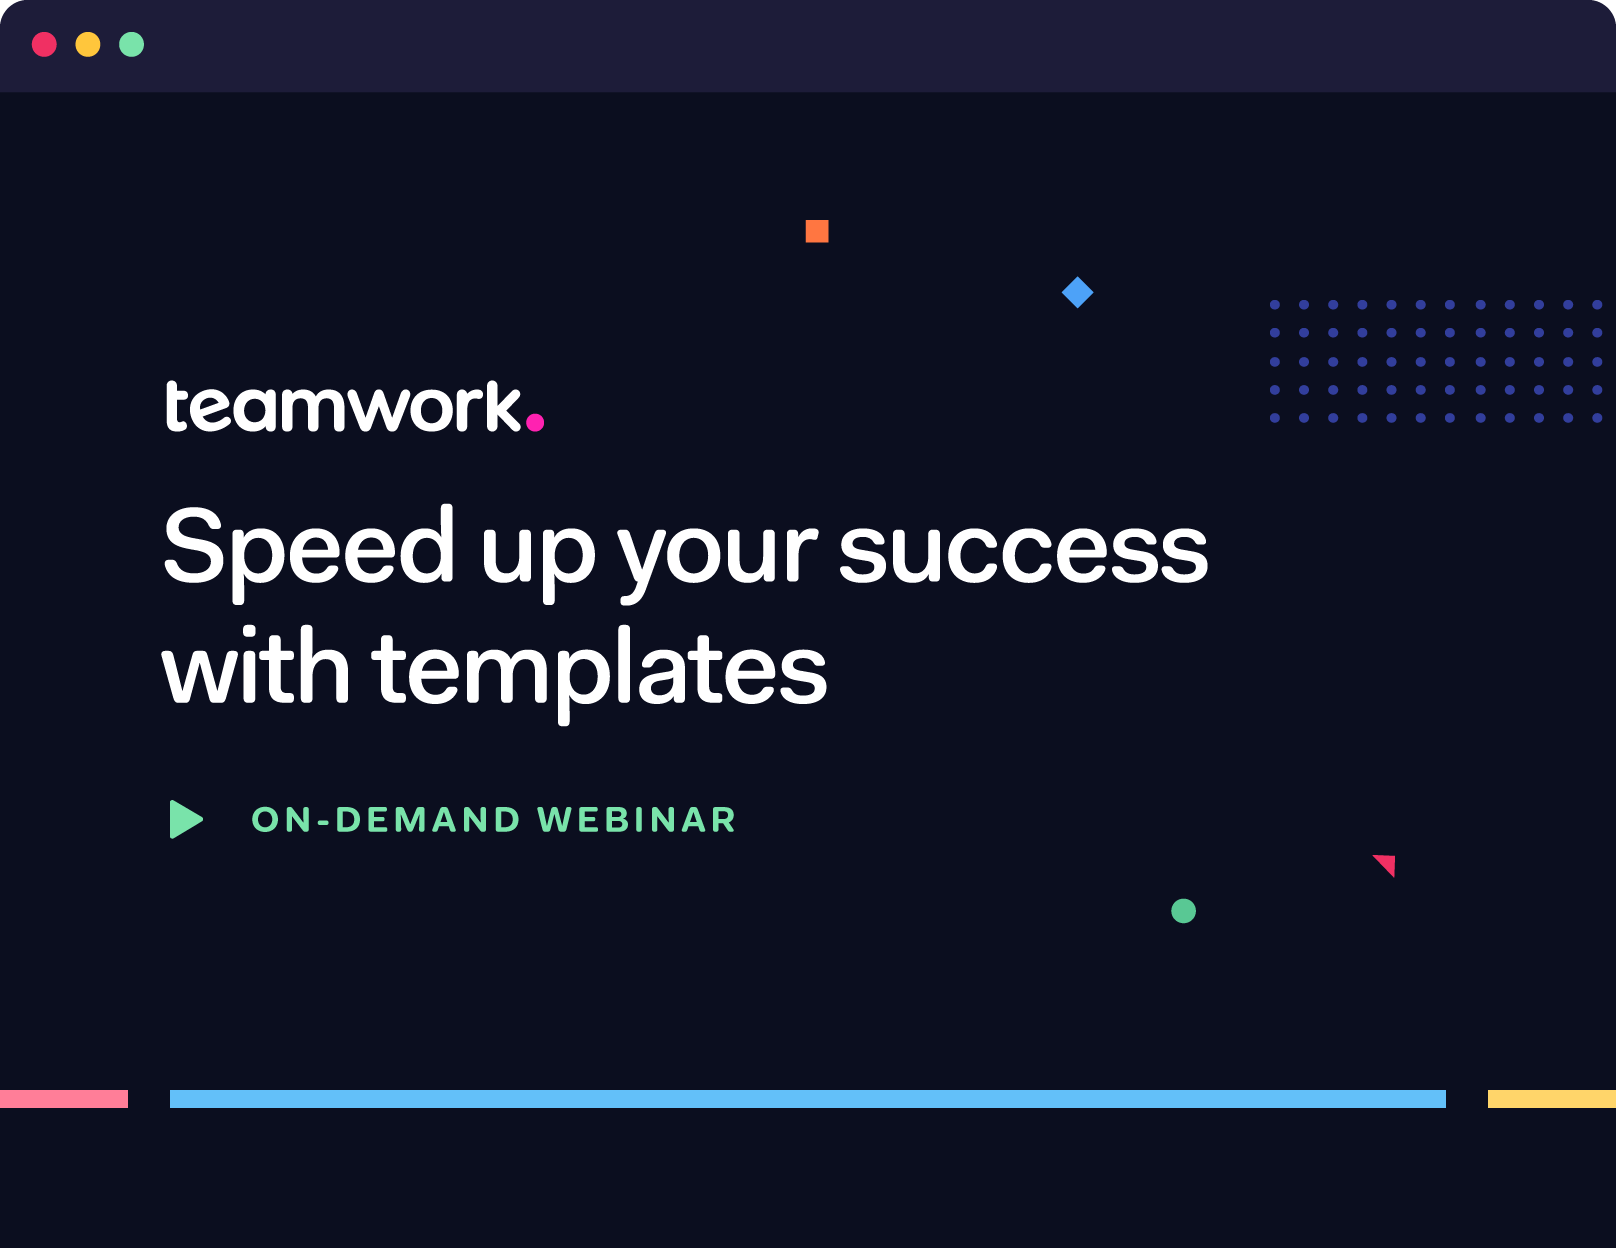 Advanced: Speed up your success with templates